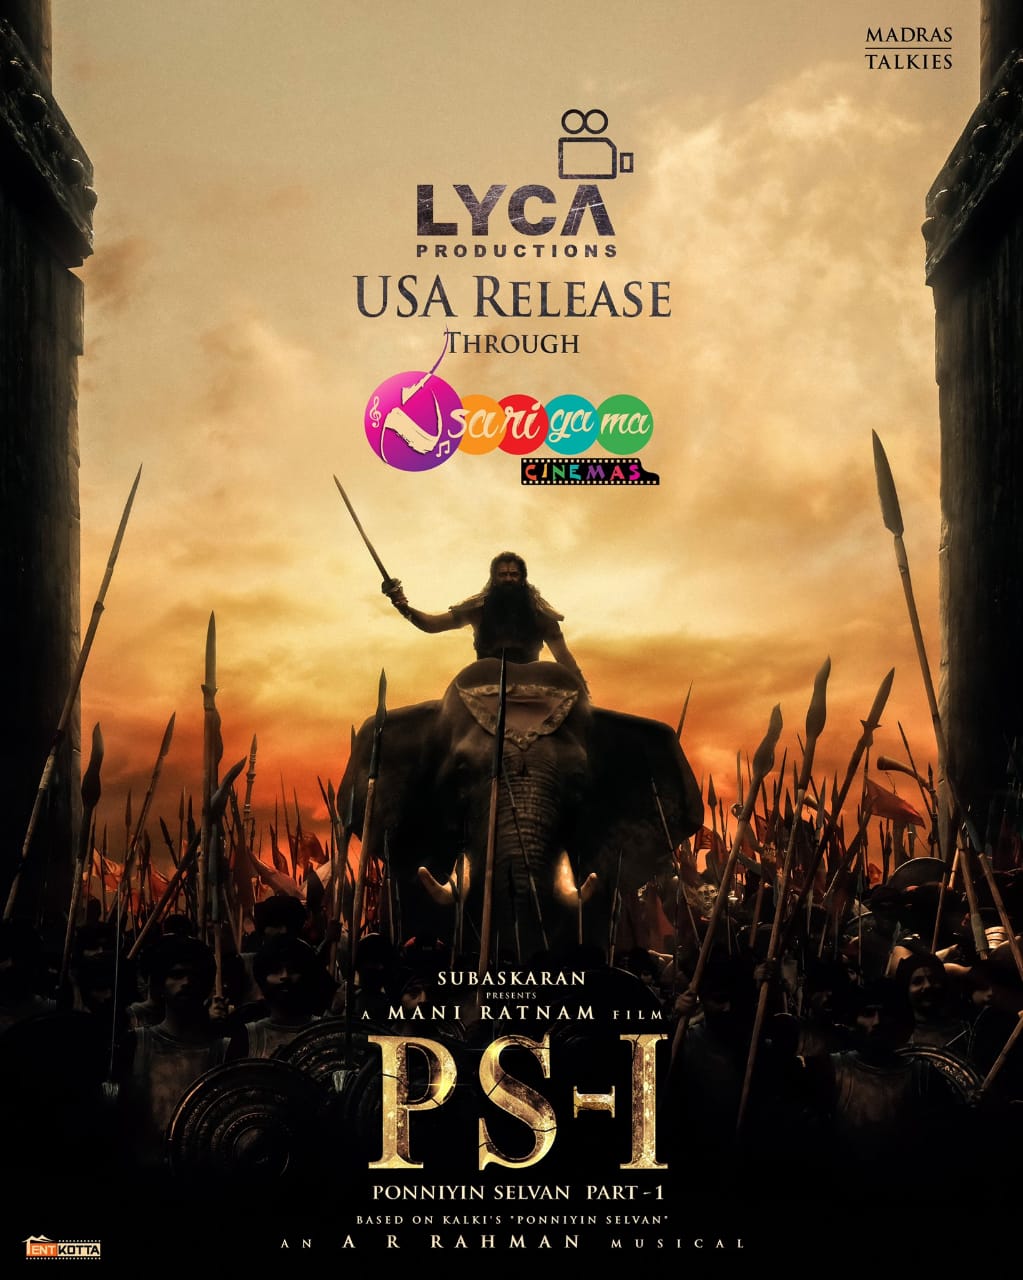 PS1 Ponniyin Selvan Movie USA Theatrical Rights Bagged by Sarigama Cinemas